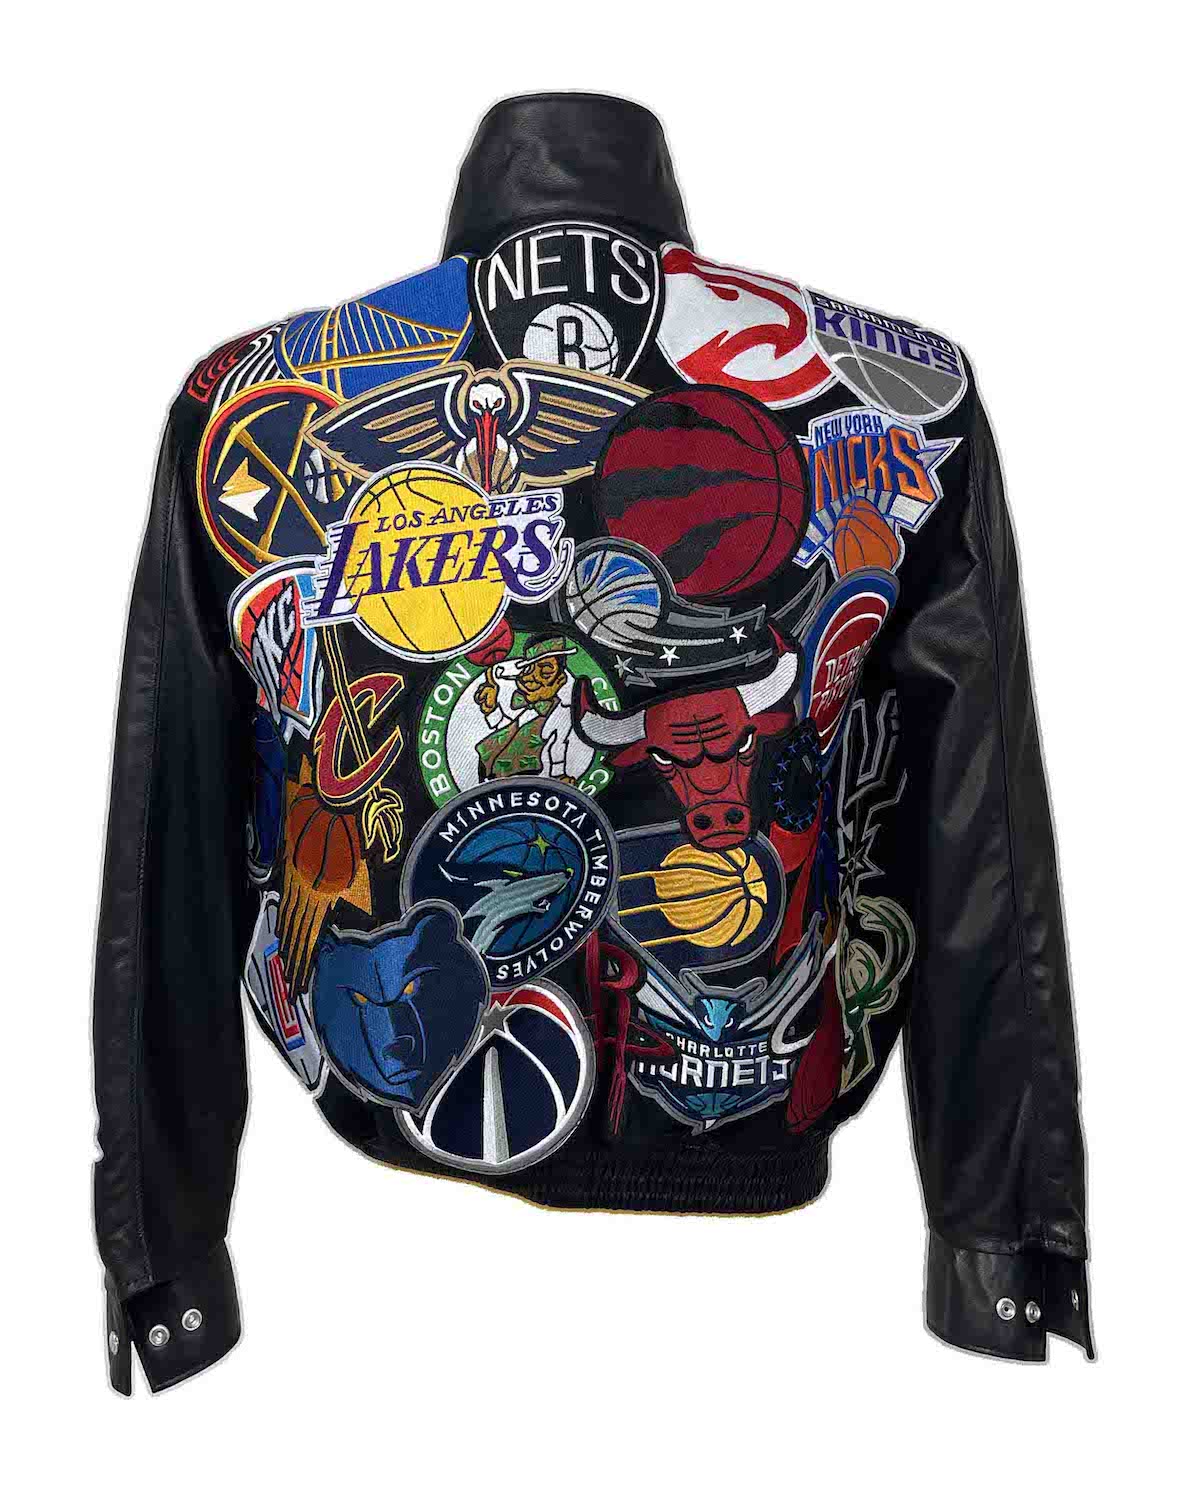 NBA MEGAPATCH LEATHER BLACK